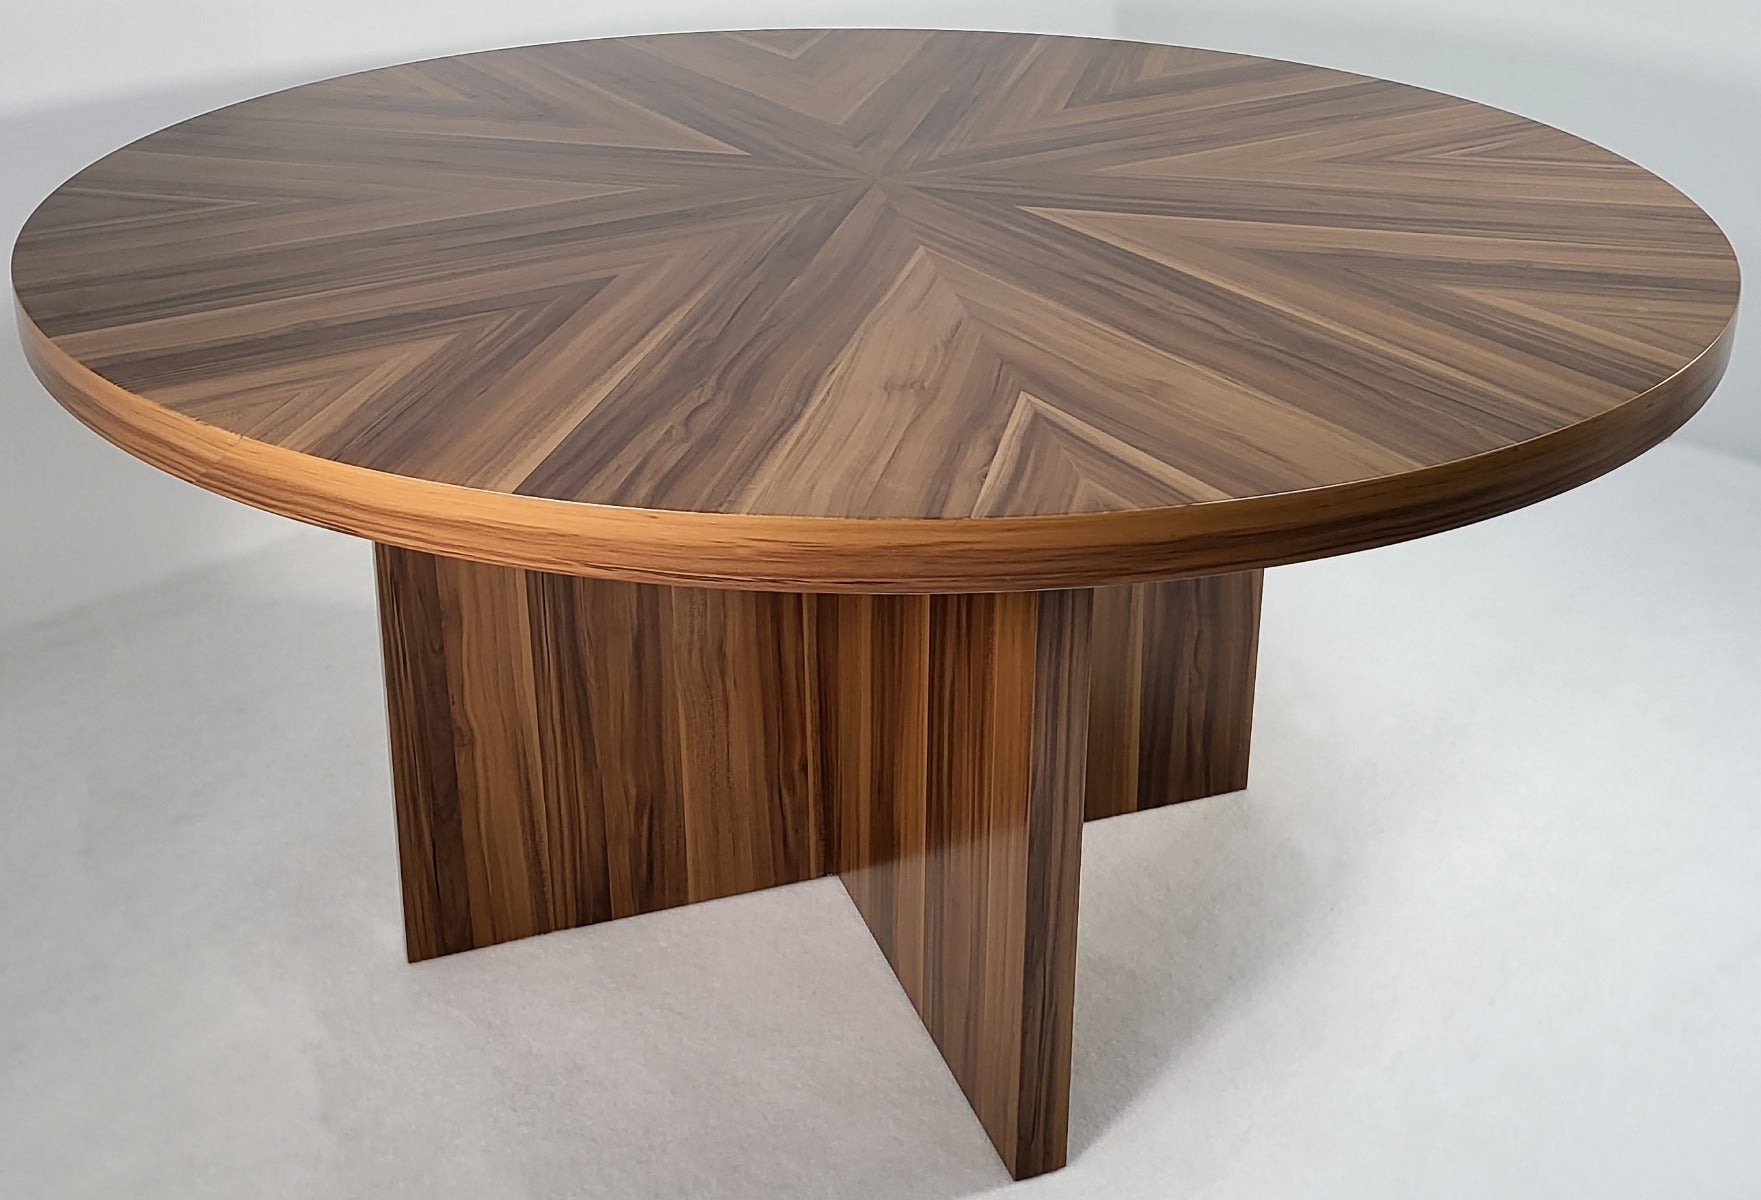 Extra Large Executive Round Meeting Table in Light Oak - B02-1500mm